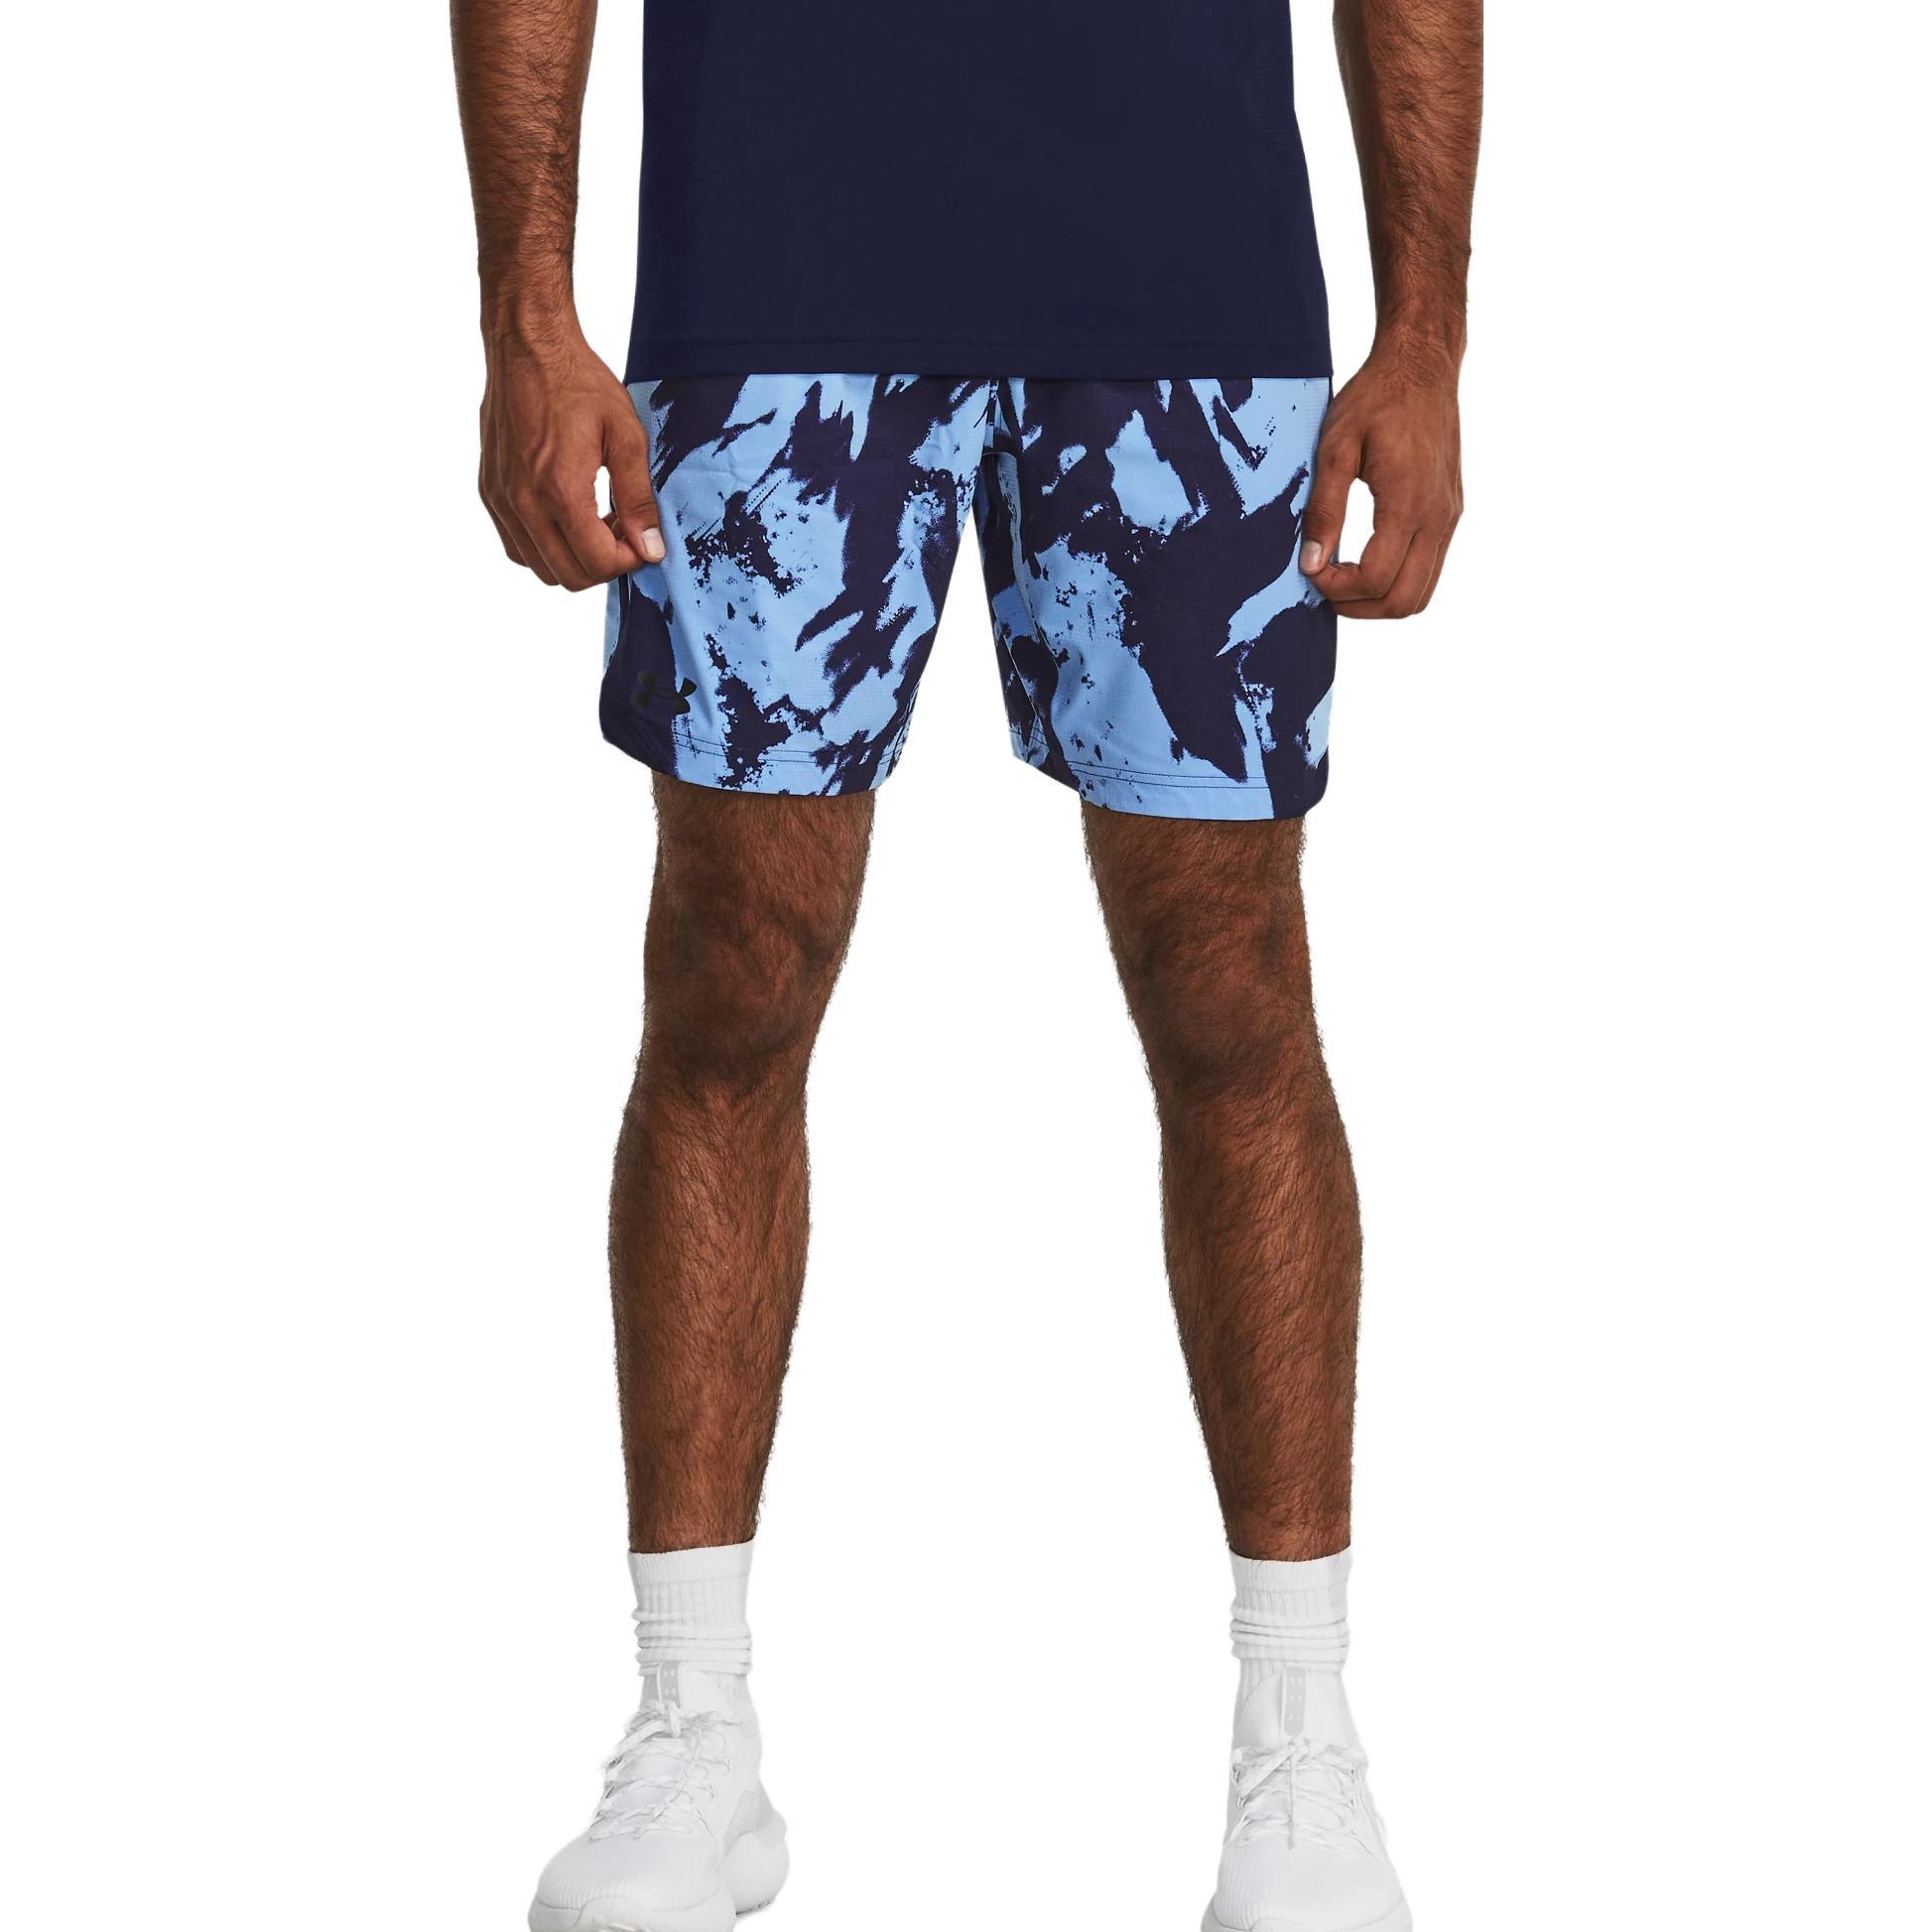 Under Armour Ua Elevated Woven Printed Shorts